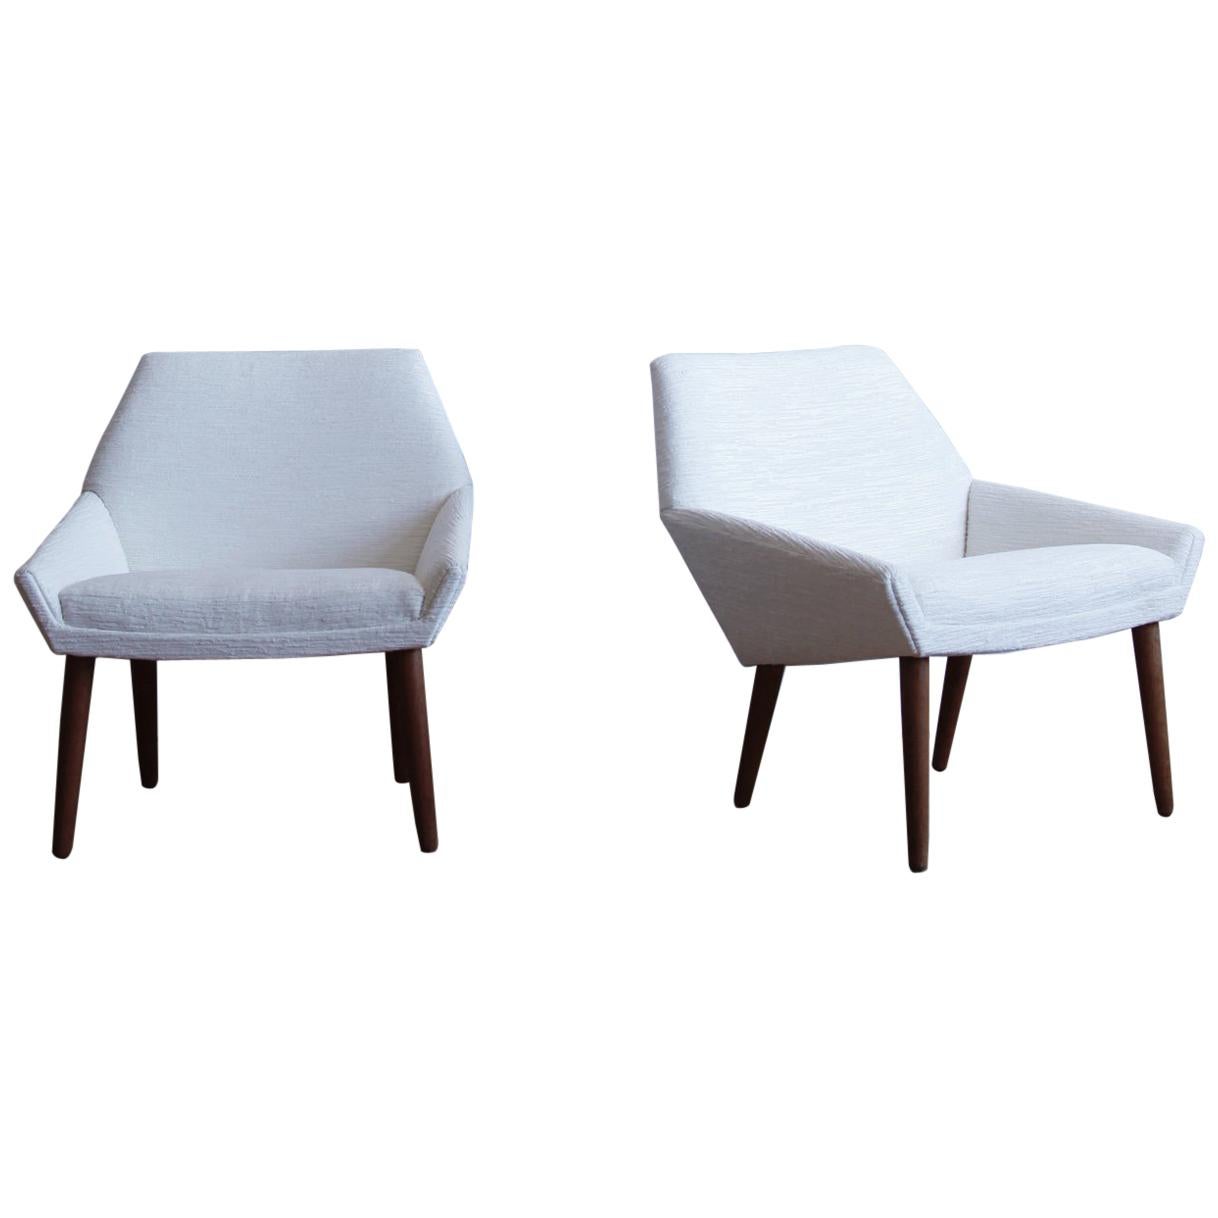 Pair of Modern Lounge Chairs by Poul Thorsbjerg For Sale